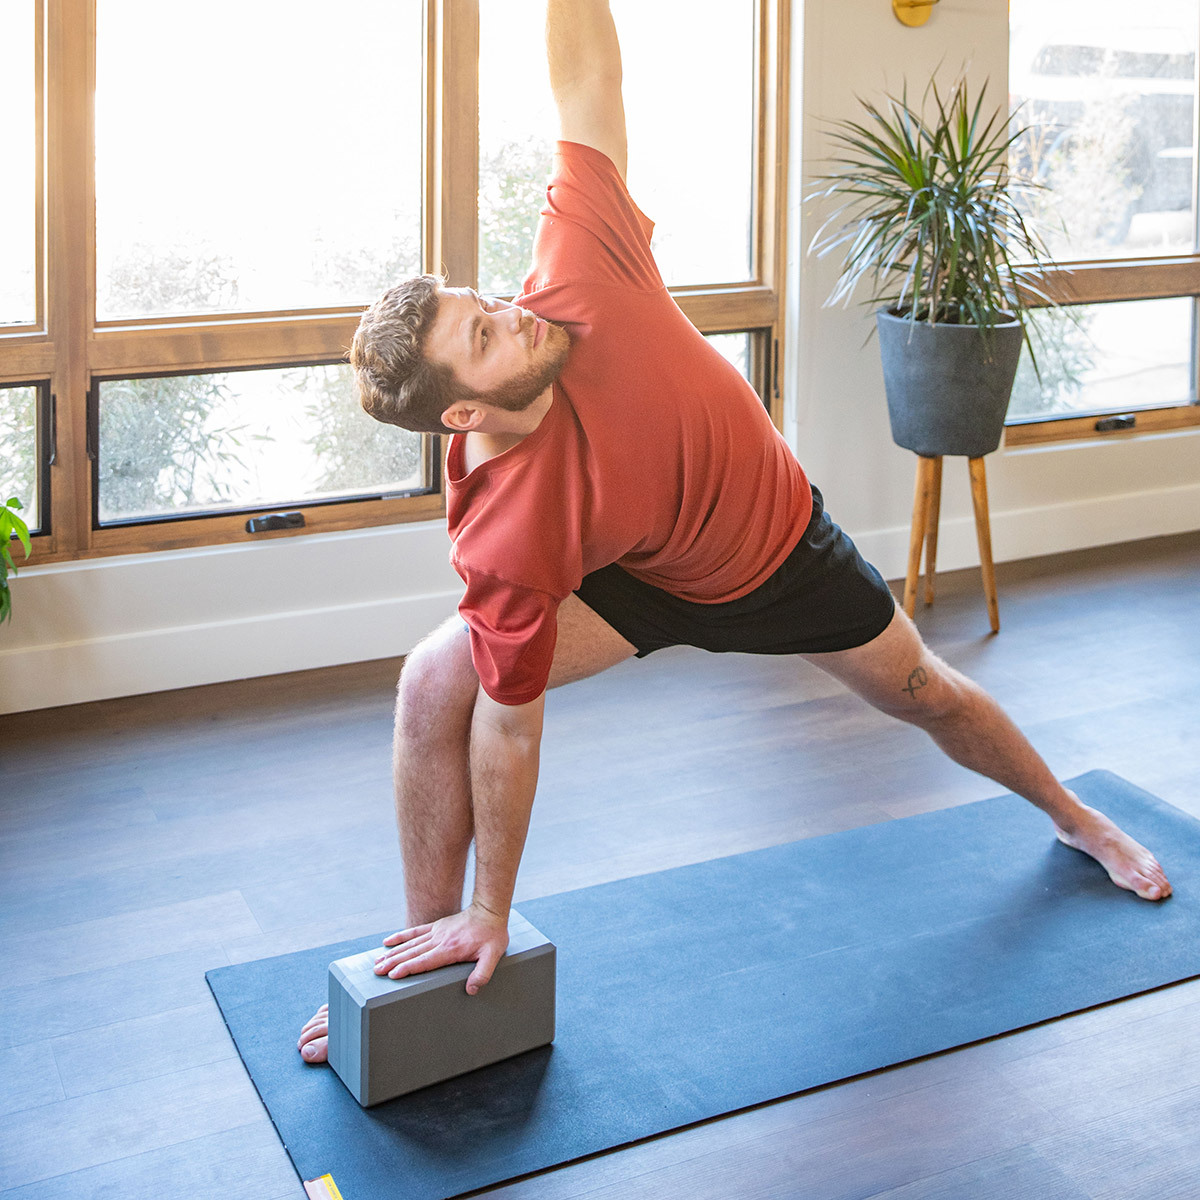 How to Use Yoga Blocks: 5 Poses to Try.